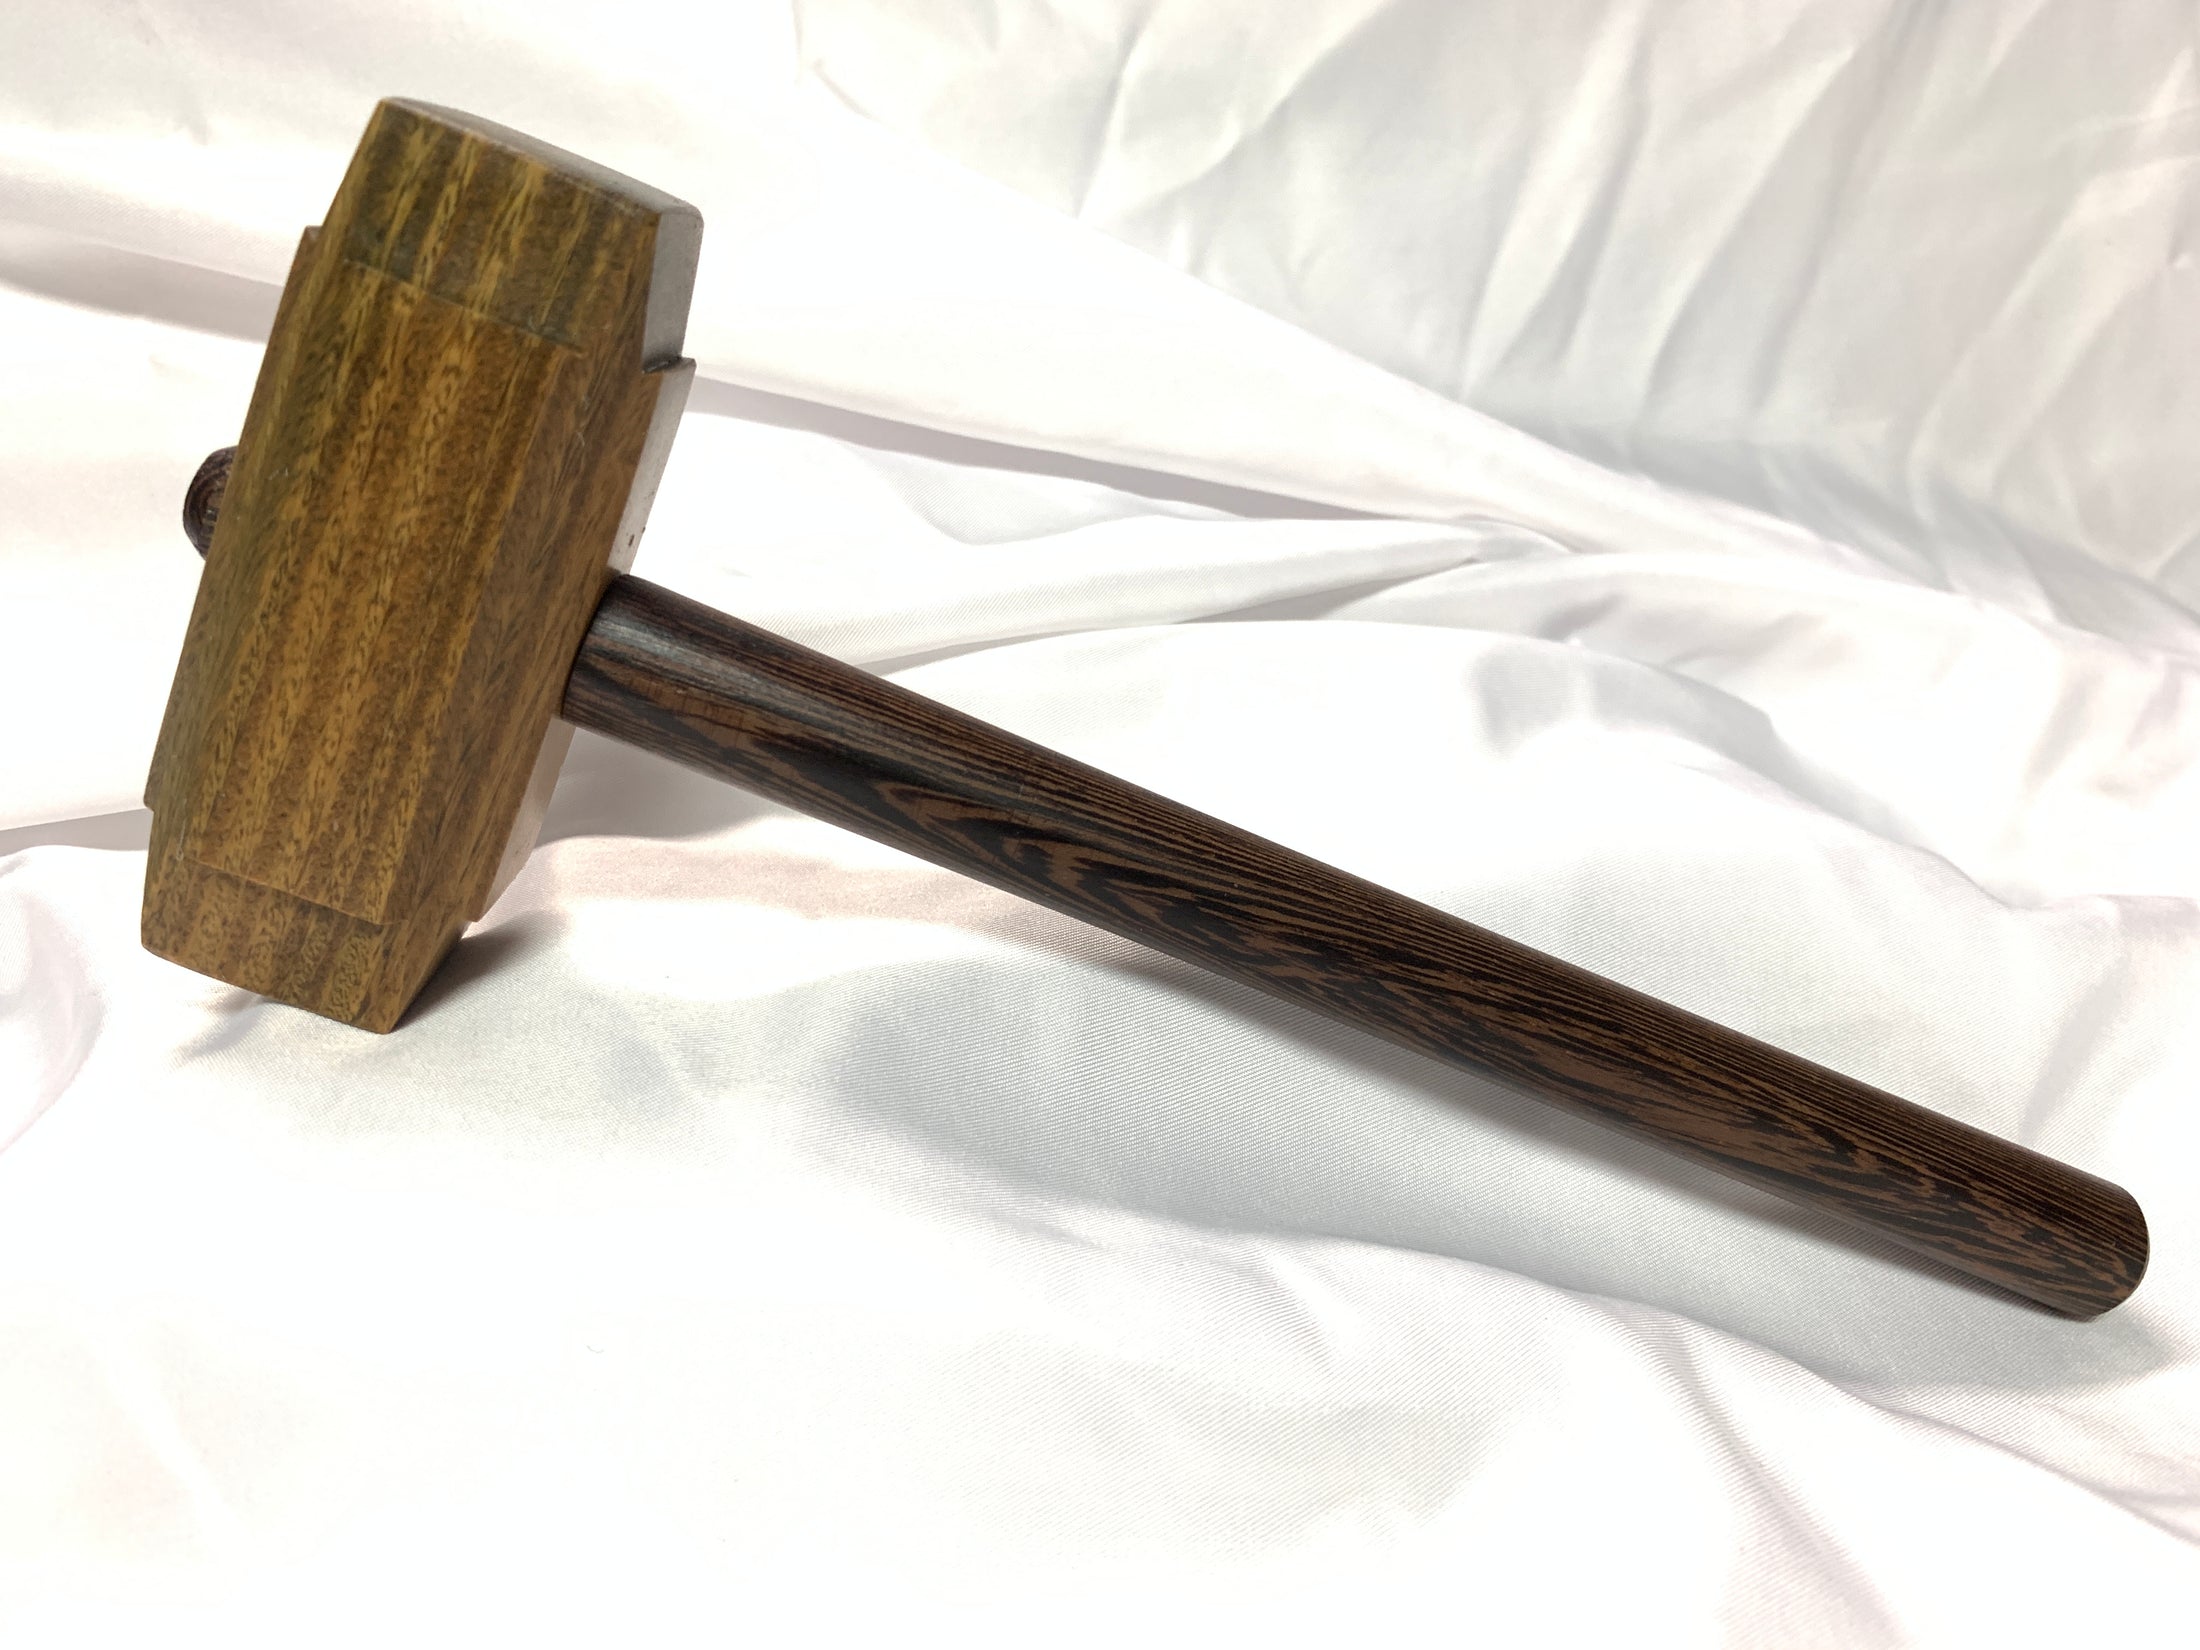 Thors Hammer Woodworking Mallet Lignum Vitae Head with Wenge Handle Kings Fine Woodworking